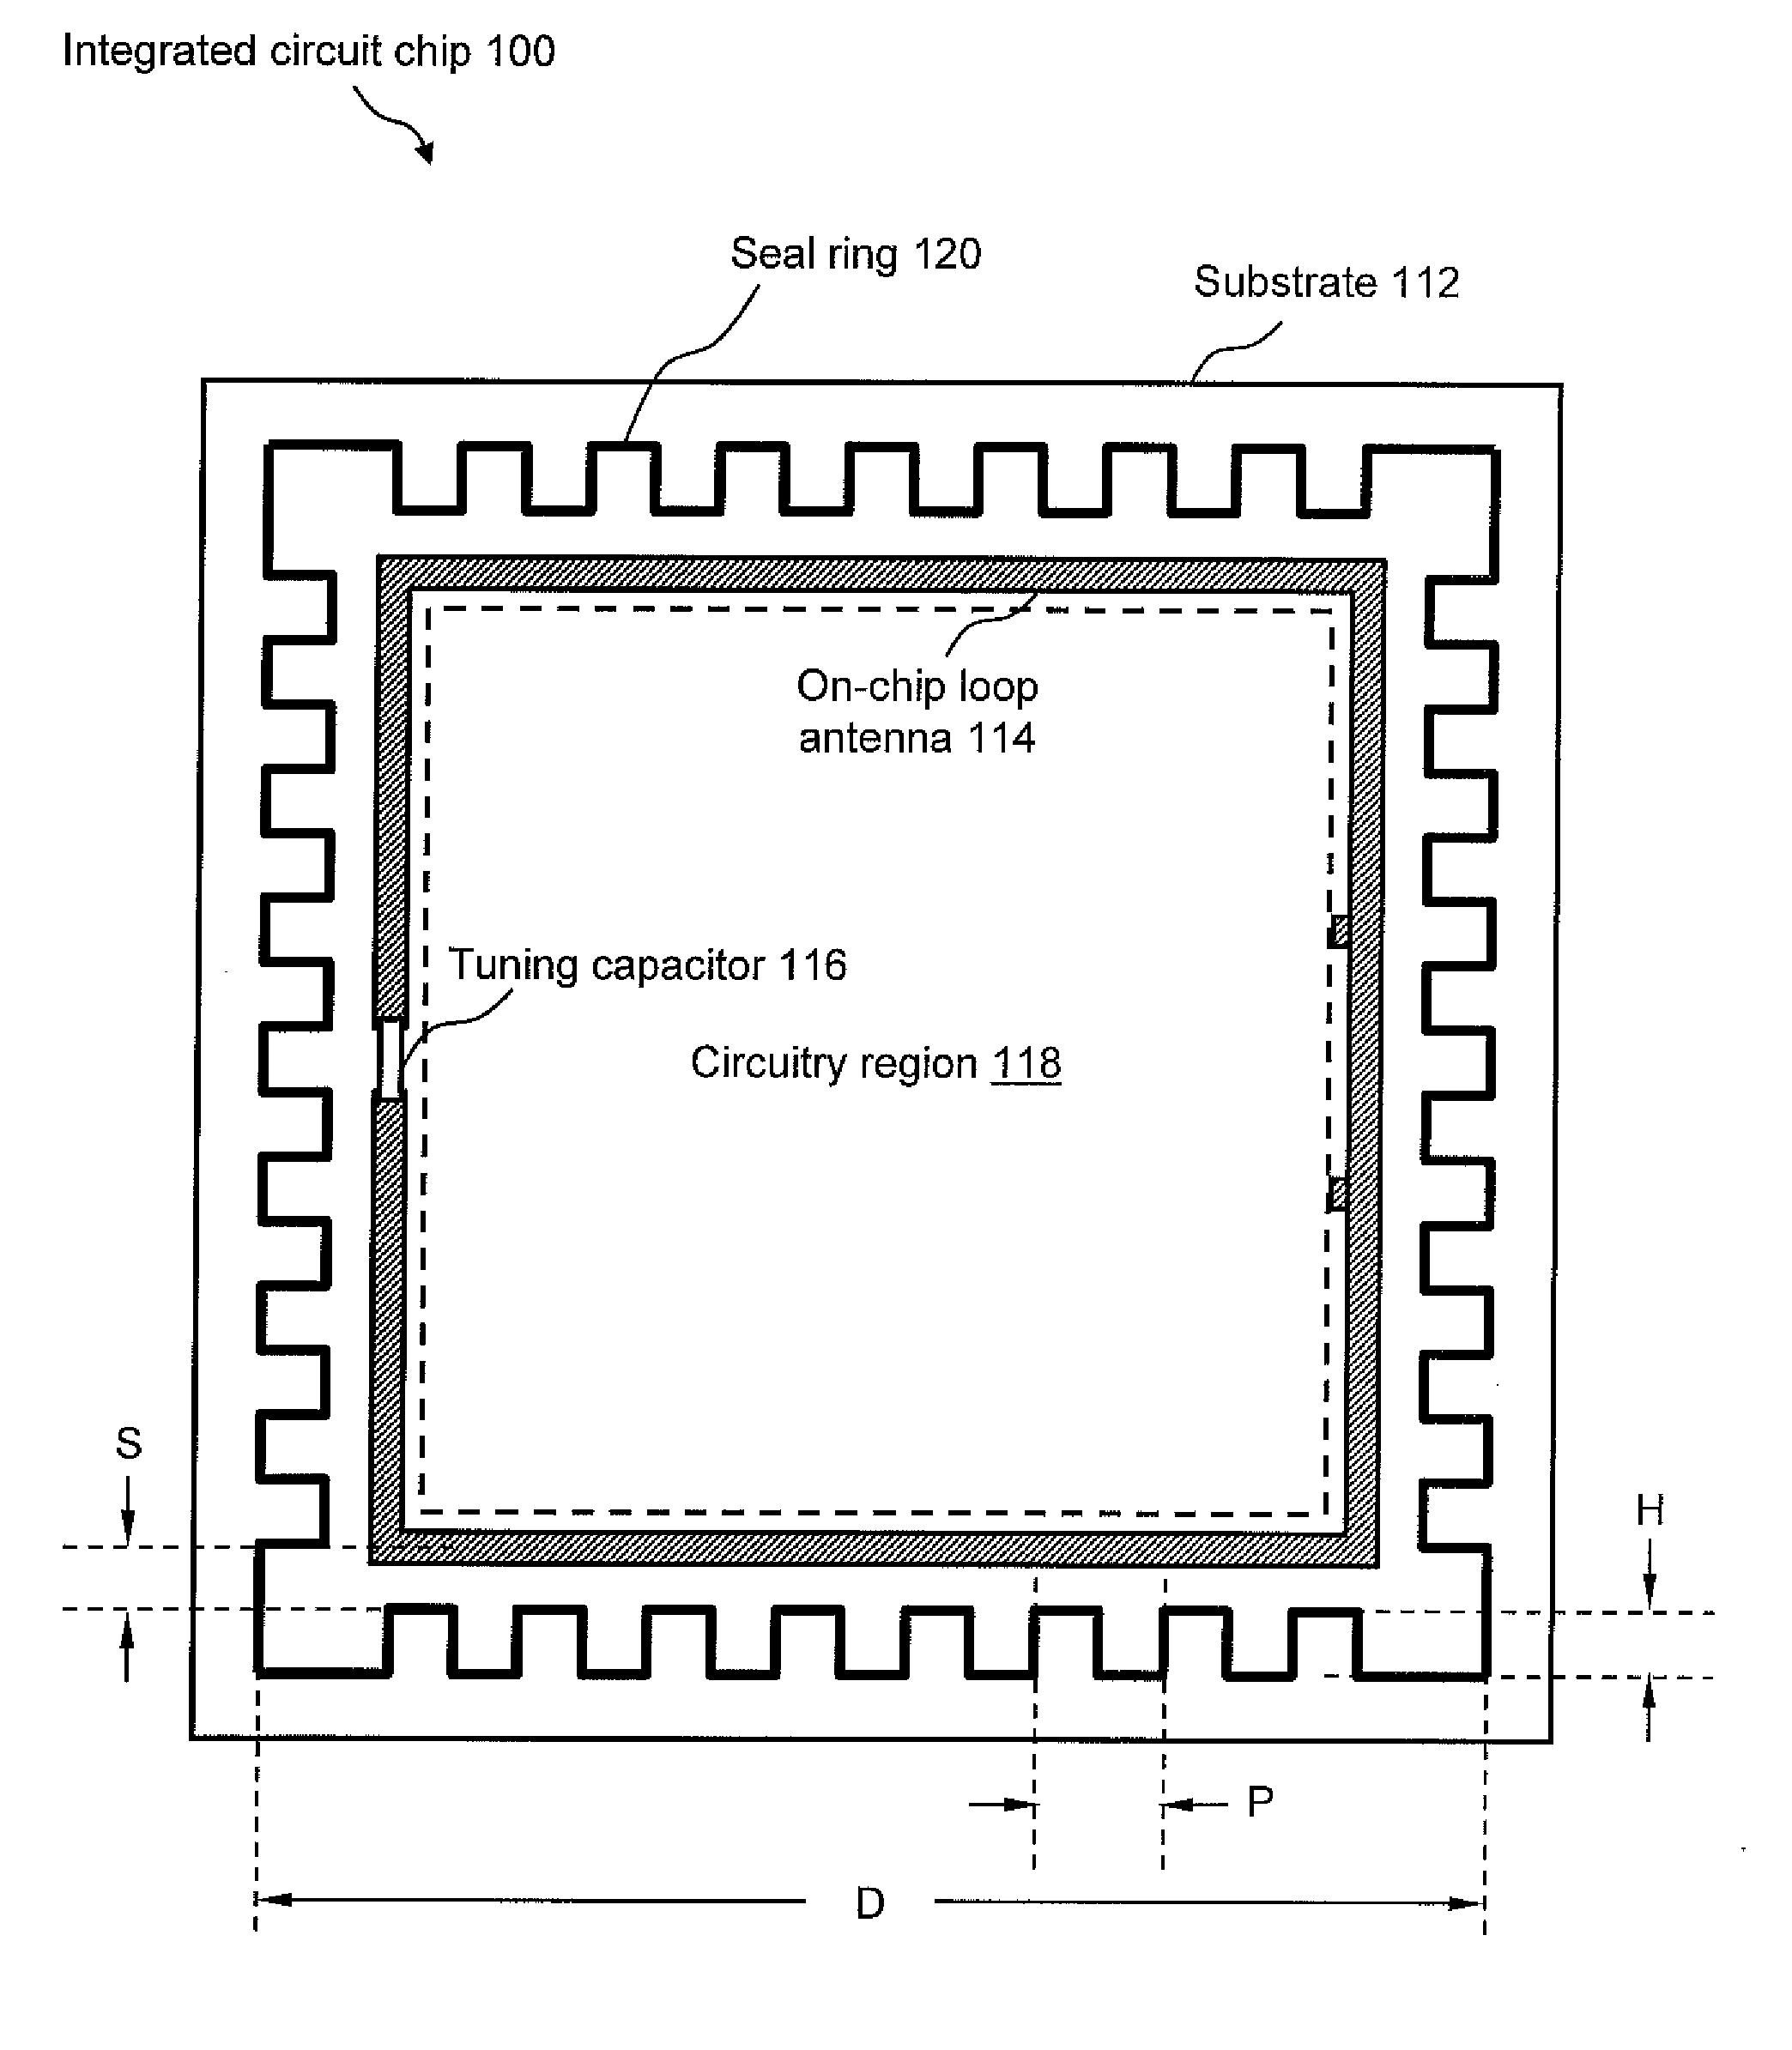 Chip Seal Ring for Enhancing the Operation of an On-Chip Loop Antenna